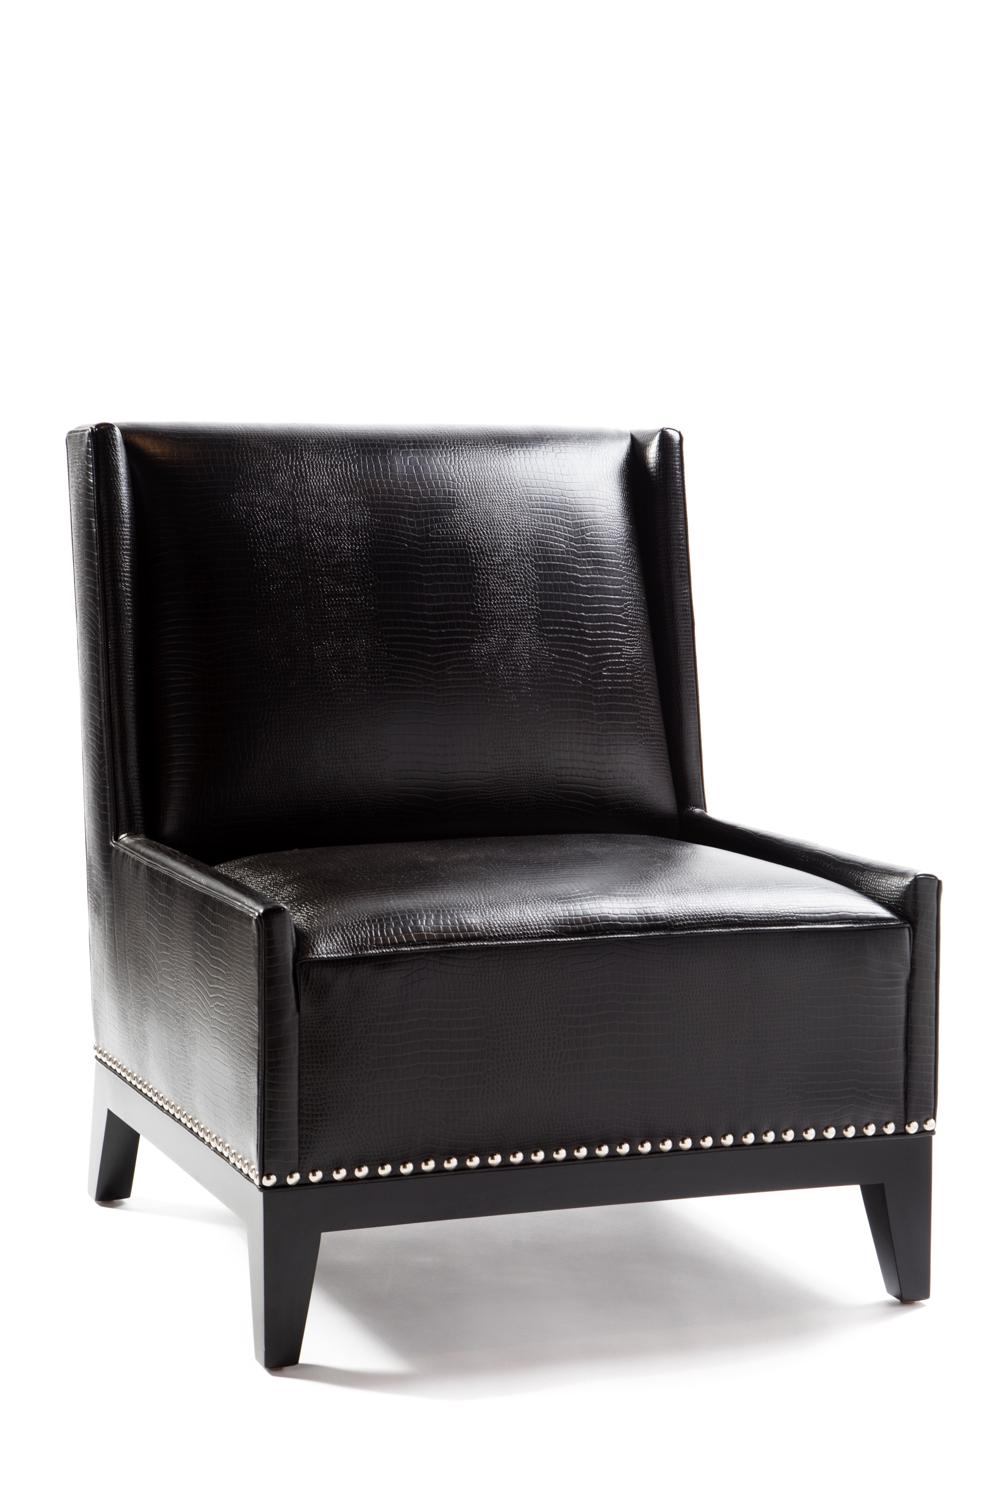 American Contemporary Roma Chair Handcrafted by James by Jimmy Delaurentis For Sale